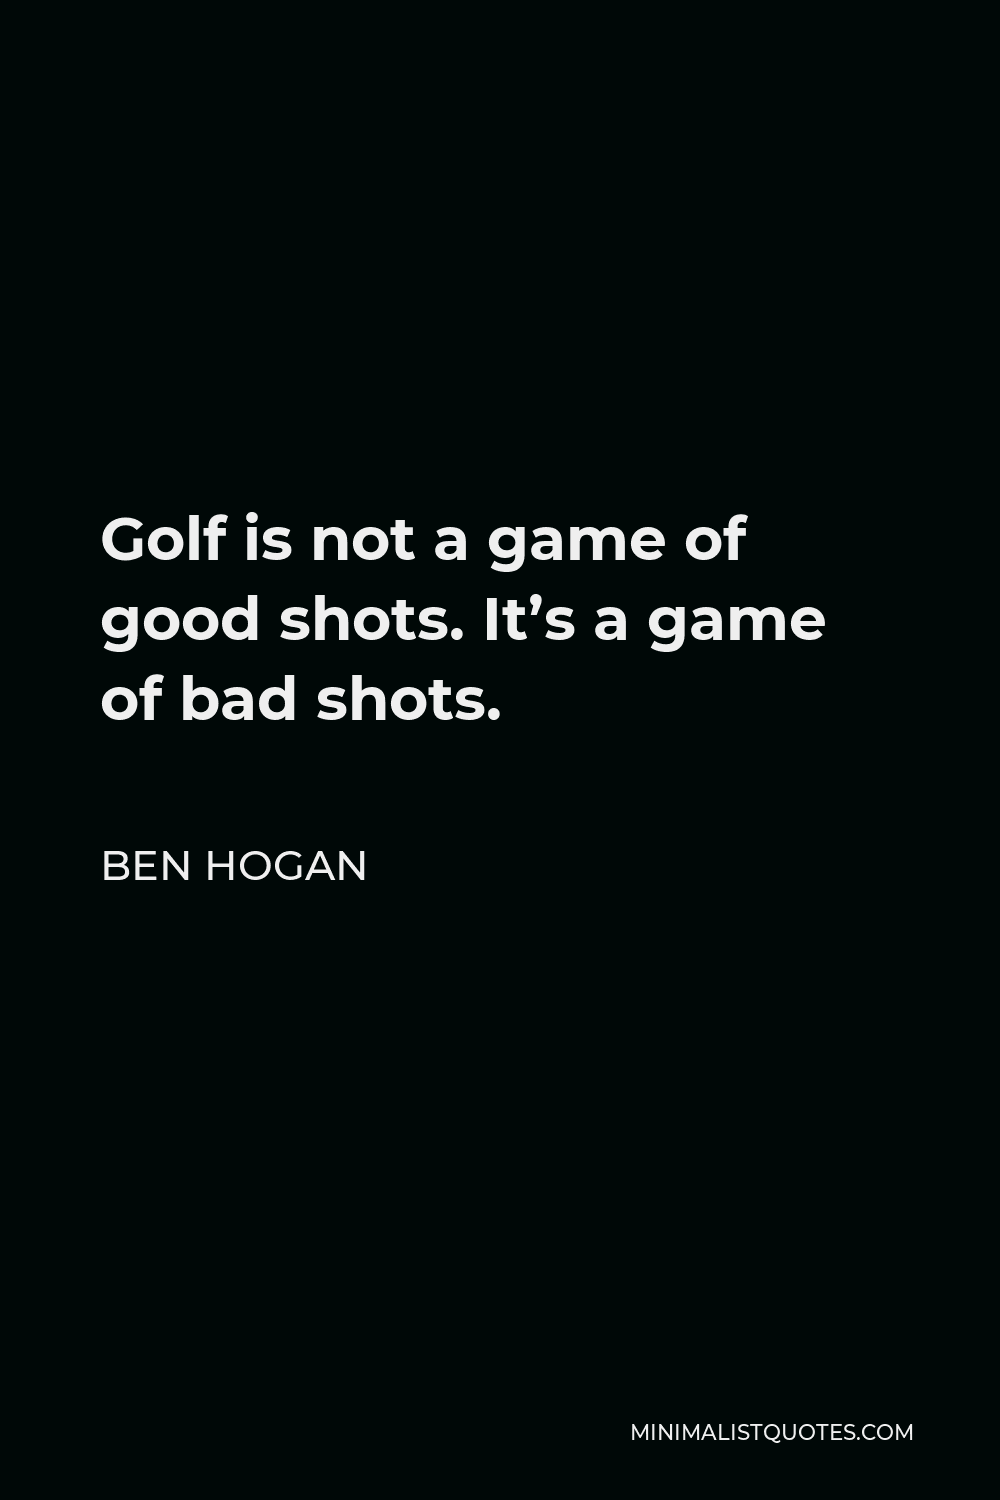 Ben Hogan Quote - Golf is not a game of good shots. It’s a game of bad shots.